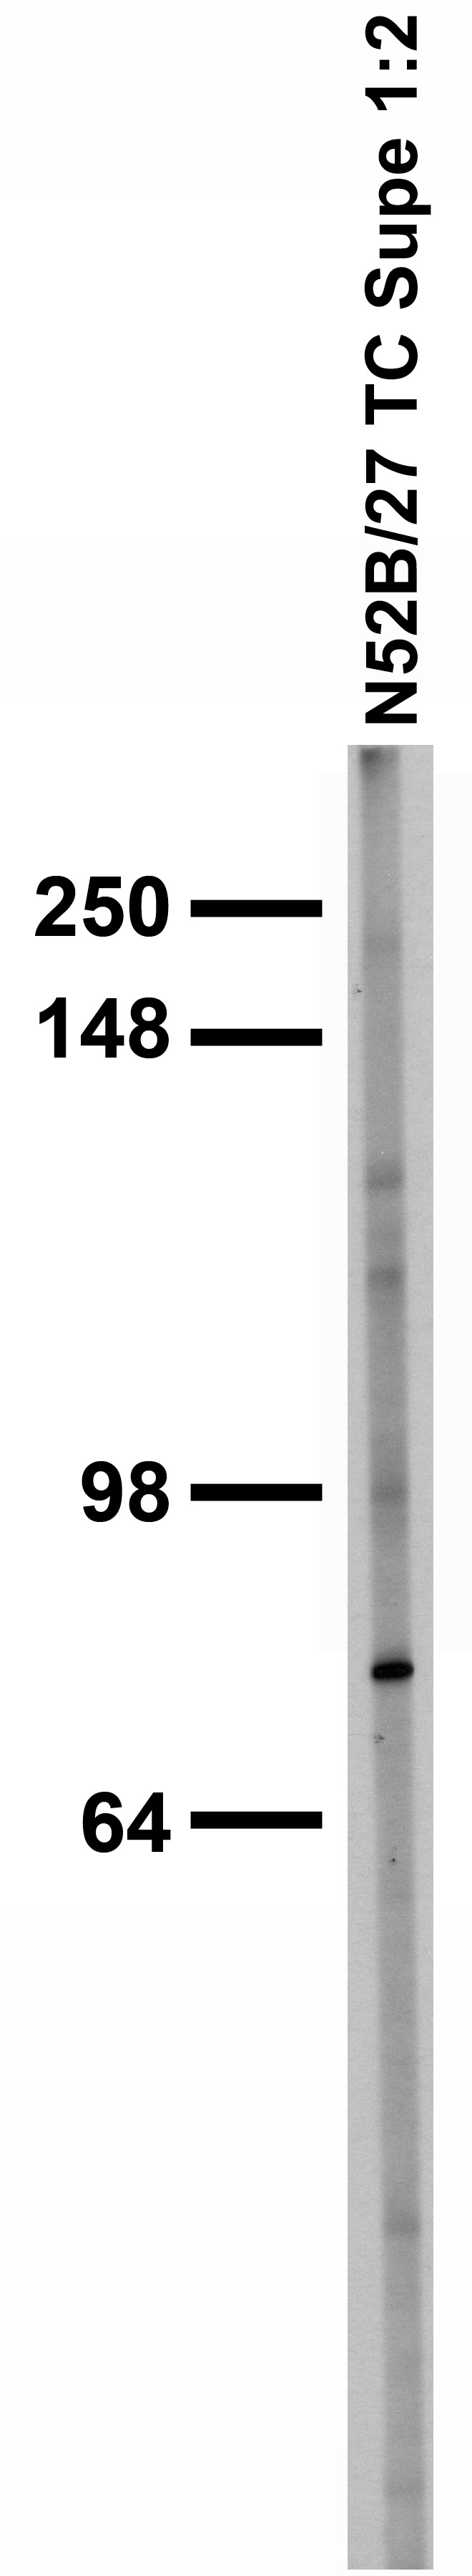 Western blot analysis in extracts from COLO205 cells using EDG-4 / LPAR2 antibody.